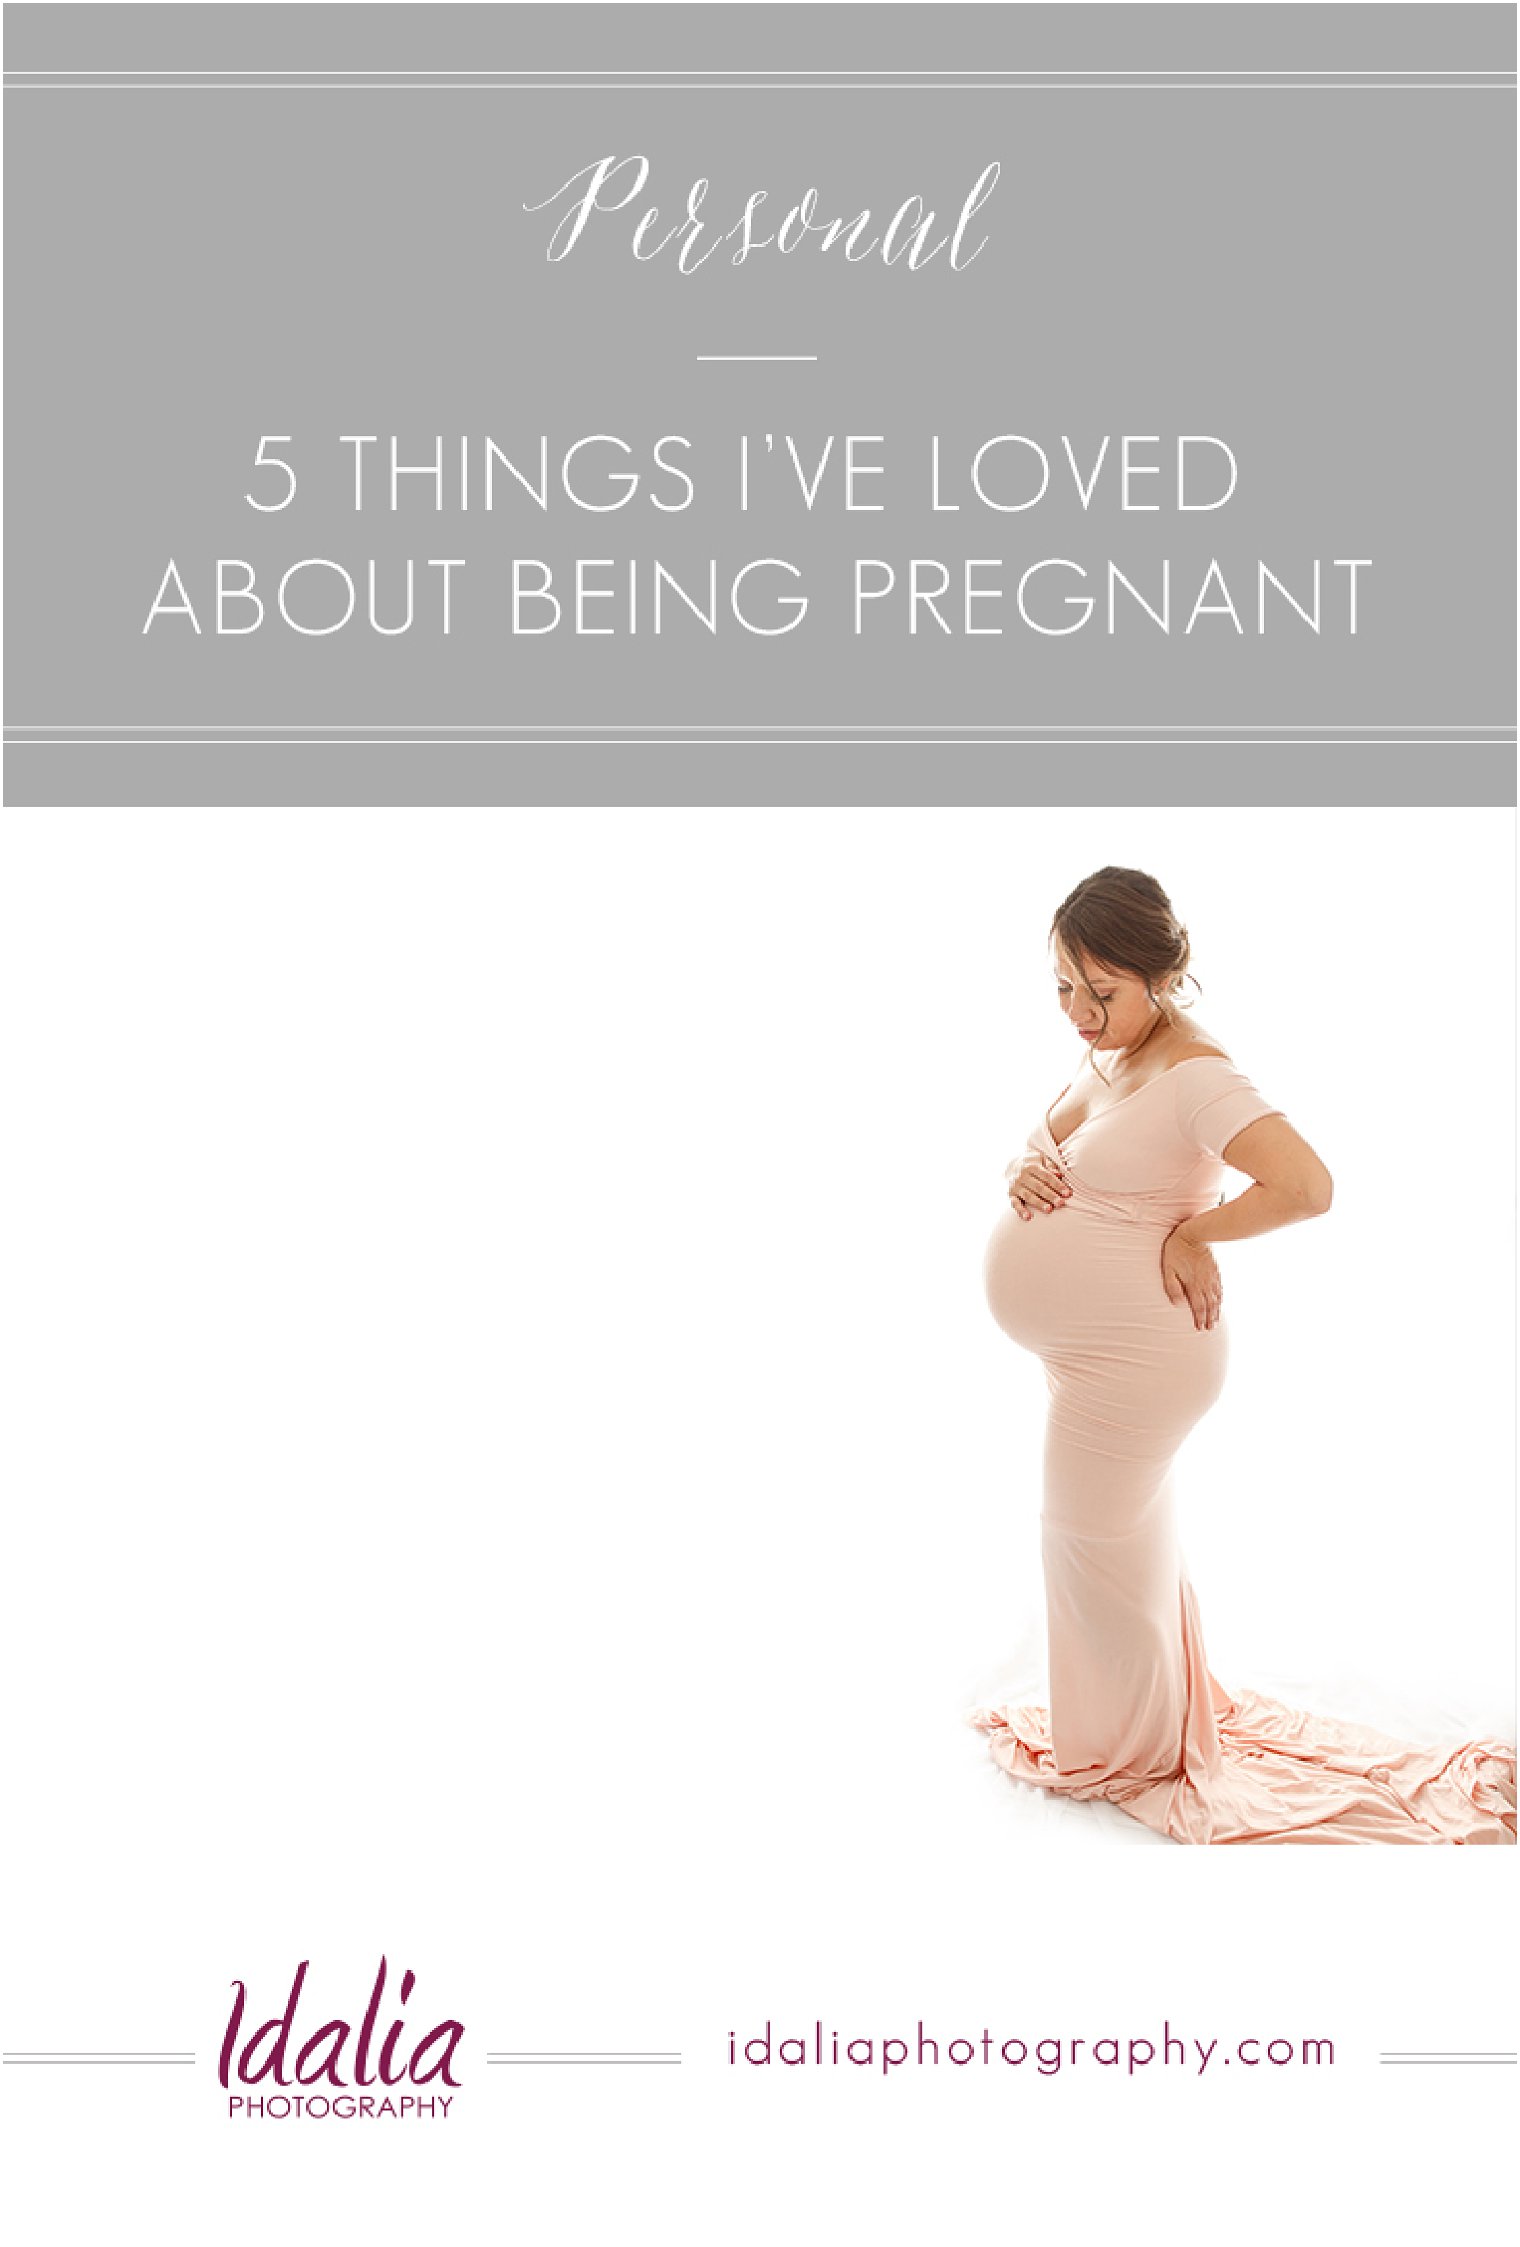 5 Things I've Loved About Being Pregnant by Idalia Photography